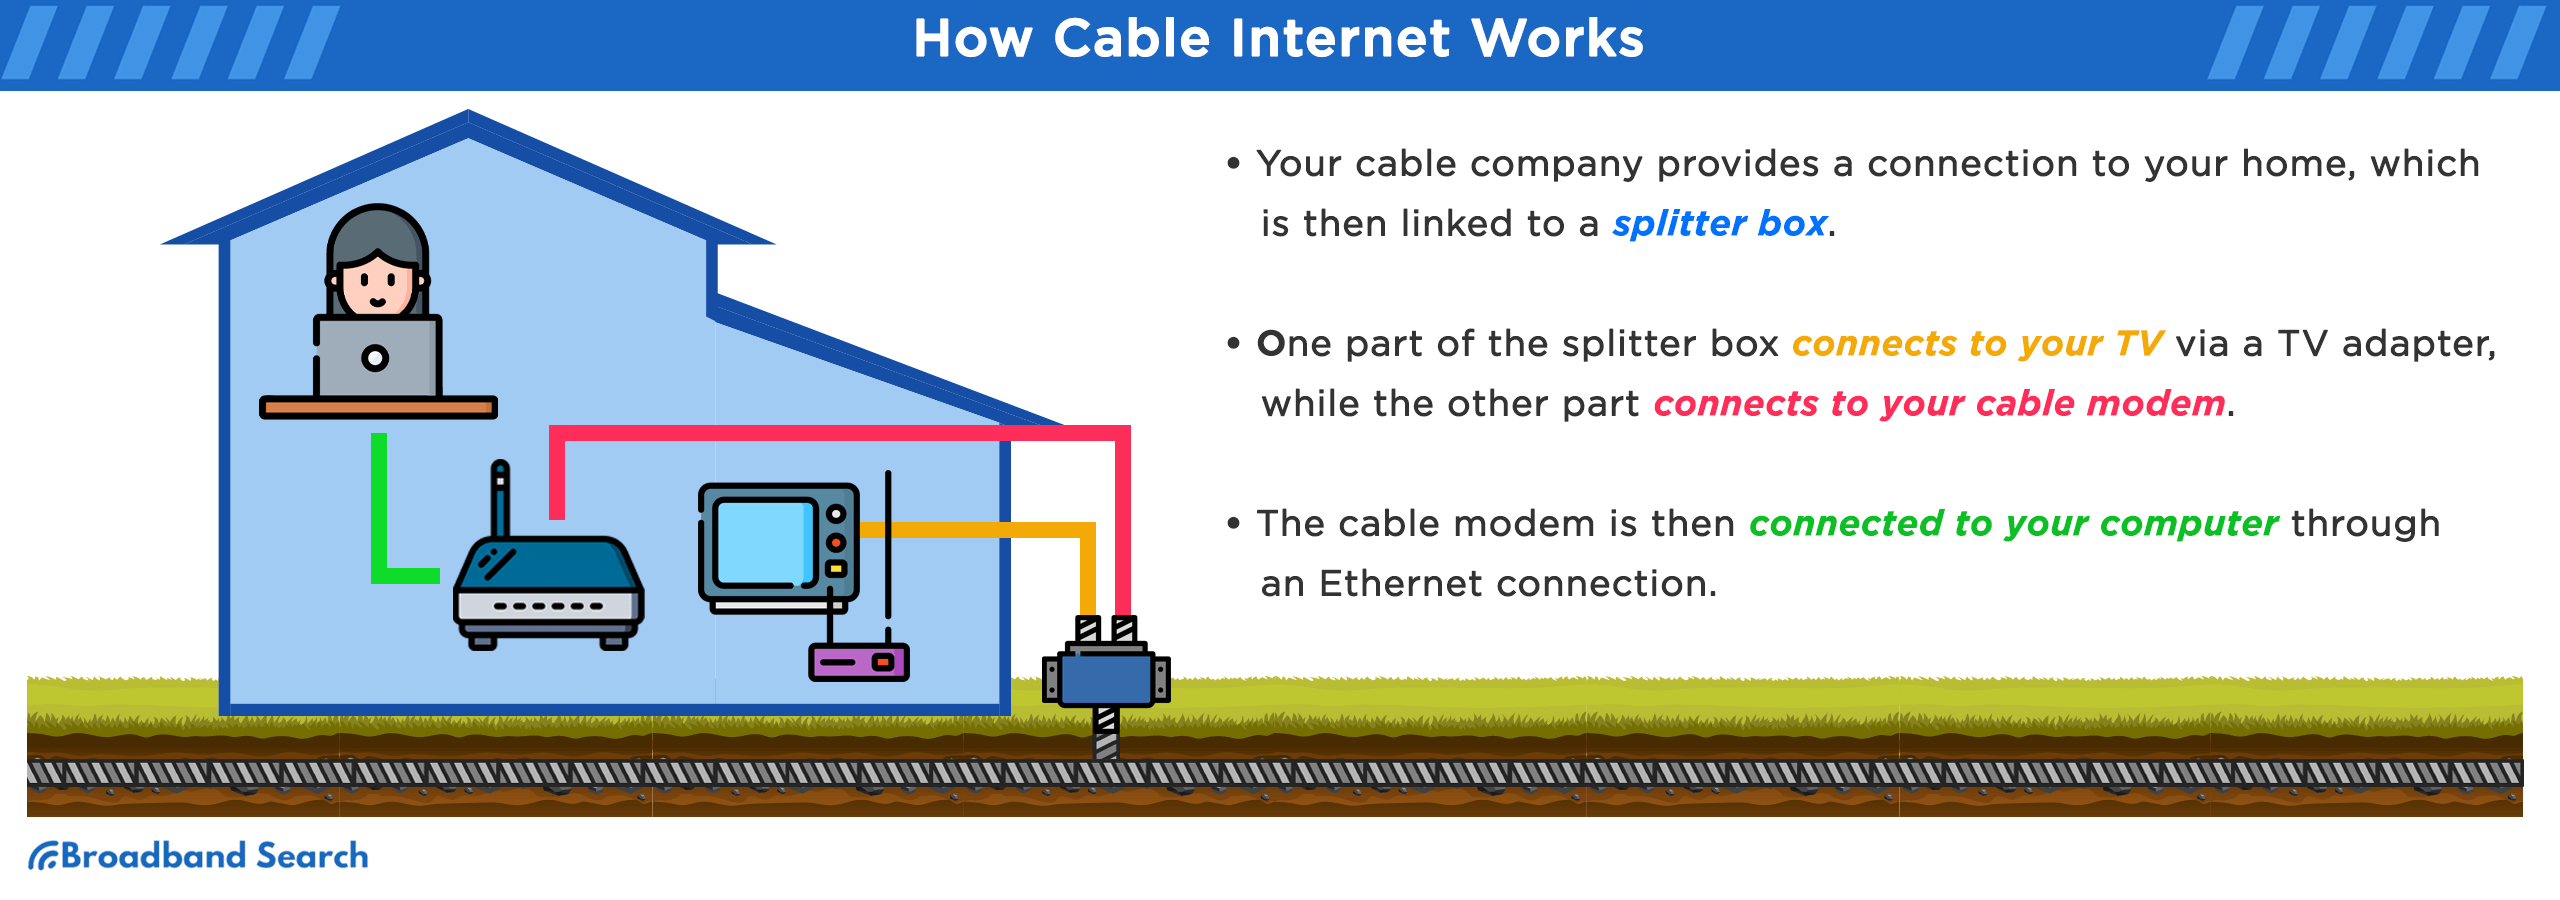 How cable internet works